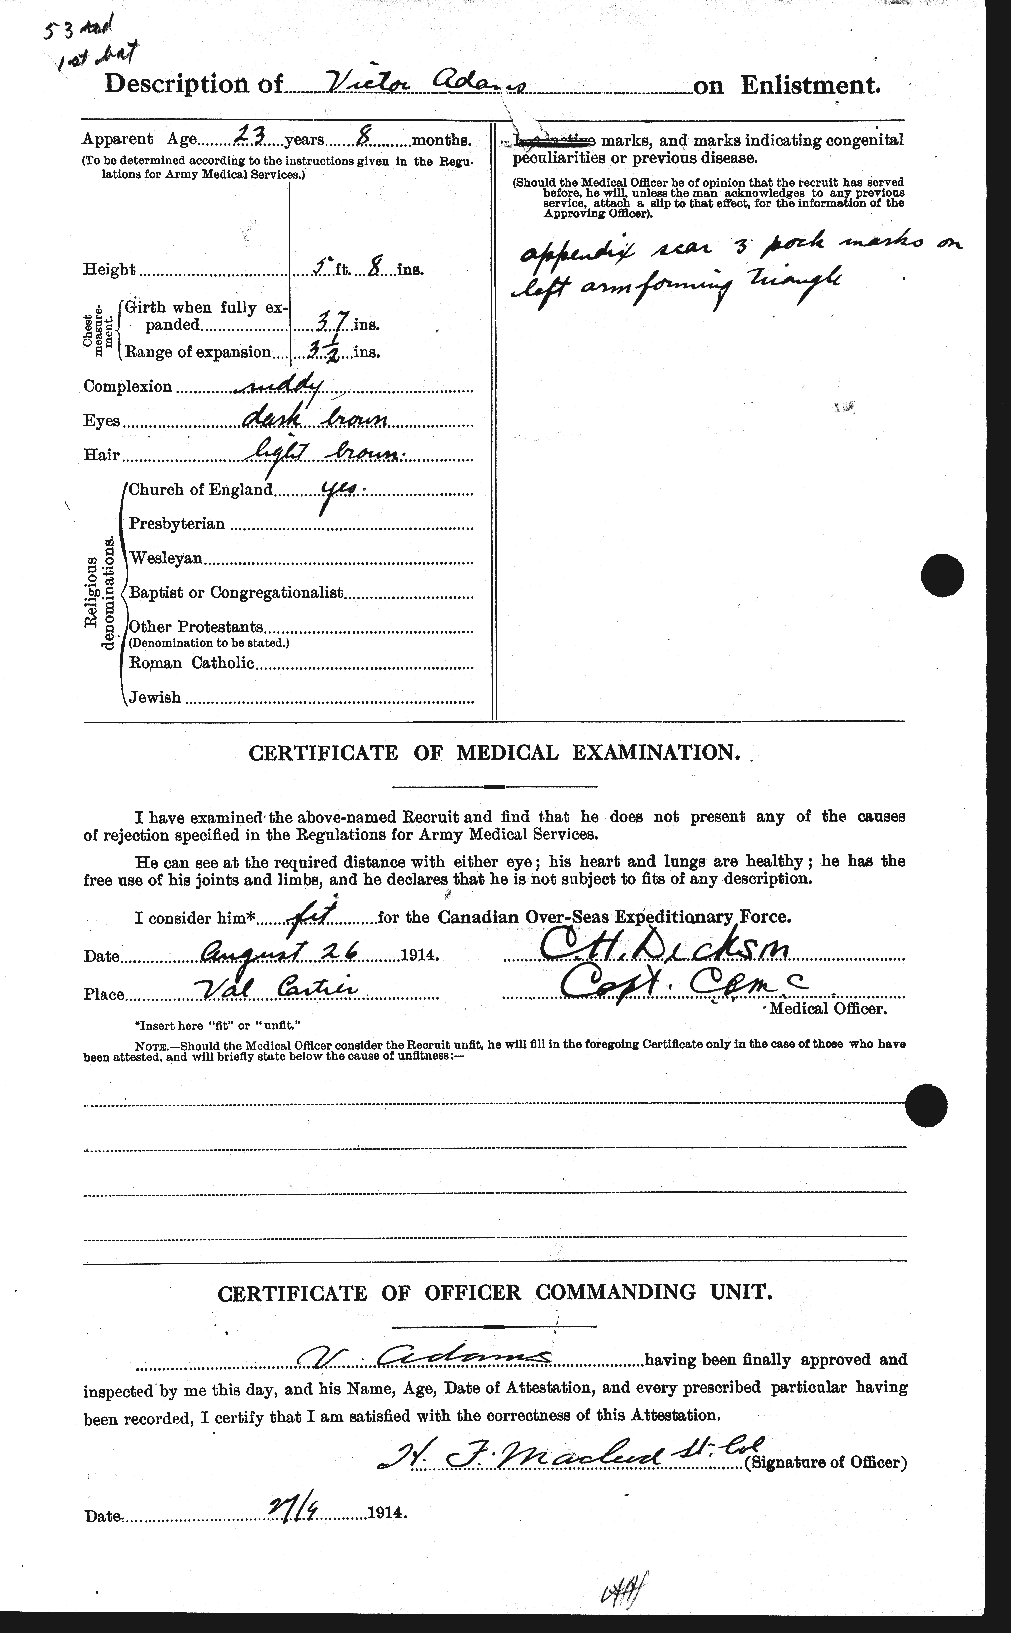 Personnel Records of the First World War - CEF 202183b